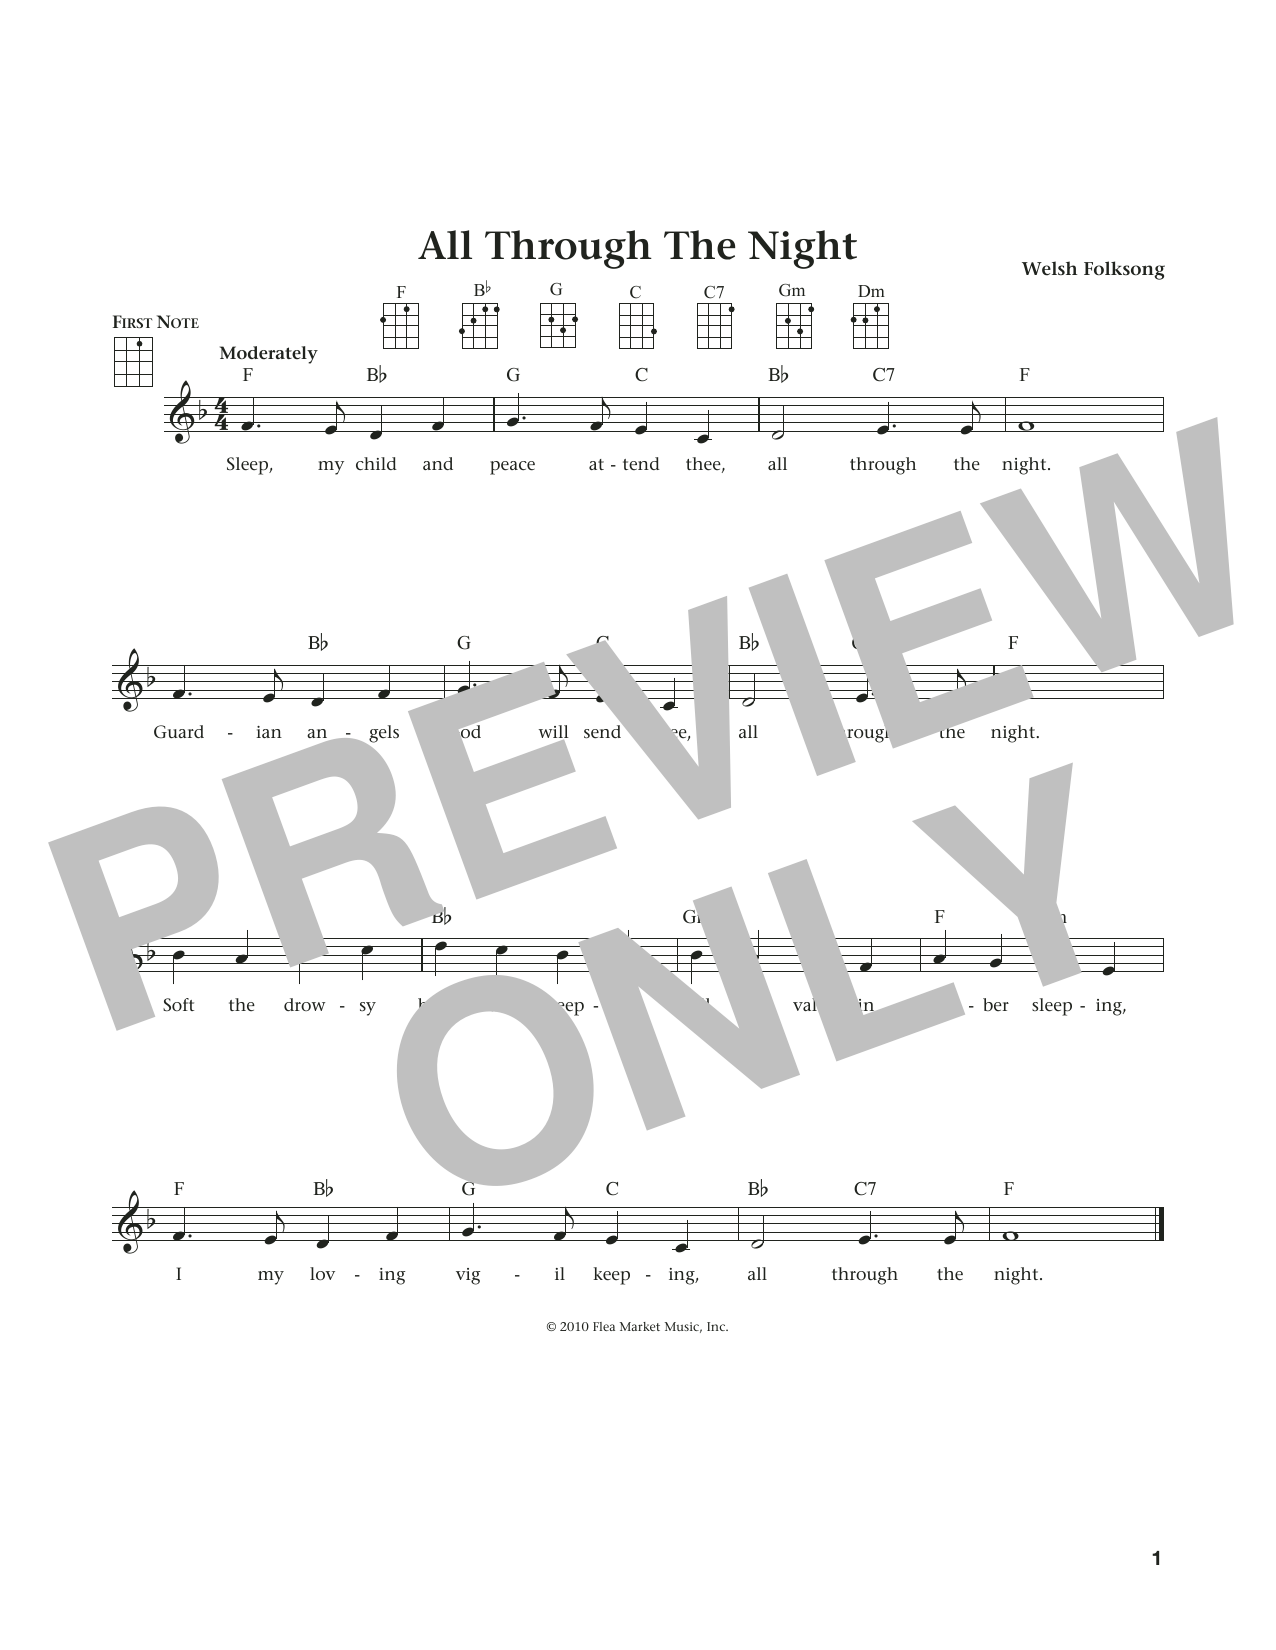 Download Welsh Folksong All Through The Night (from The Daily U Sheet Music